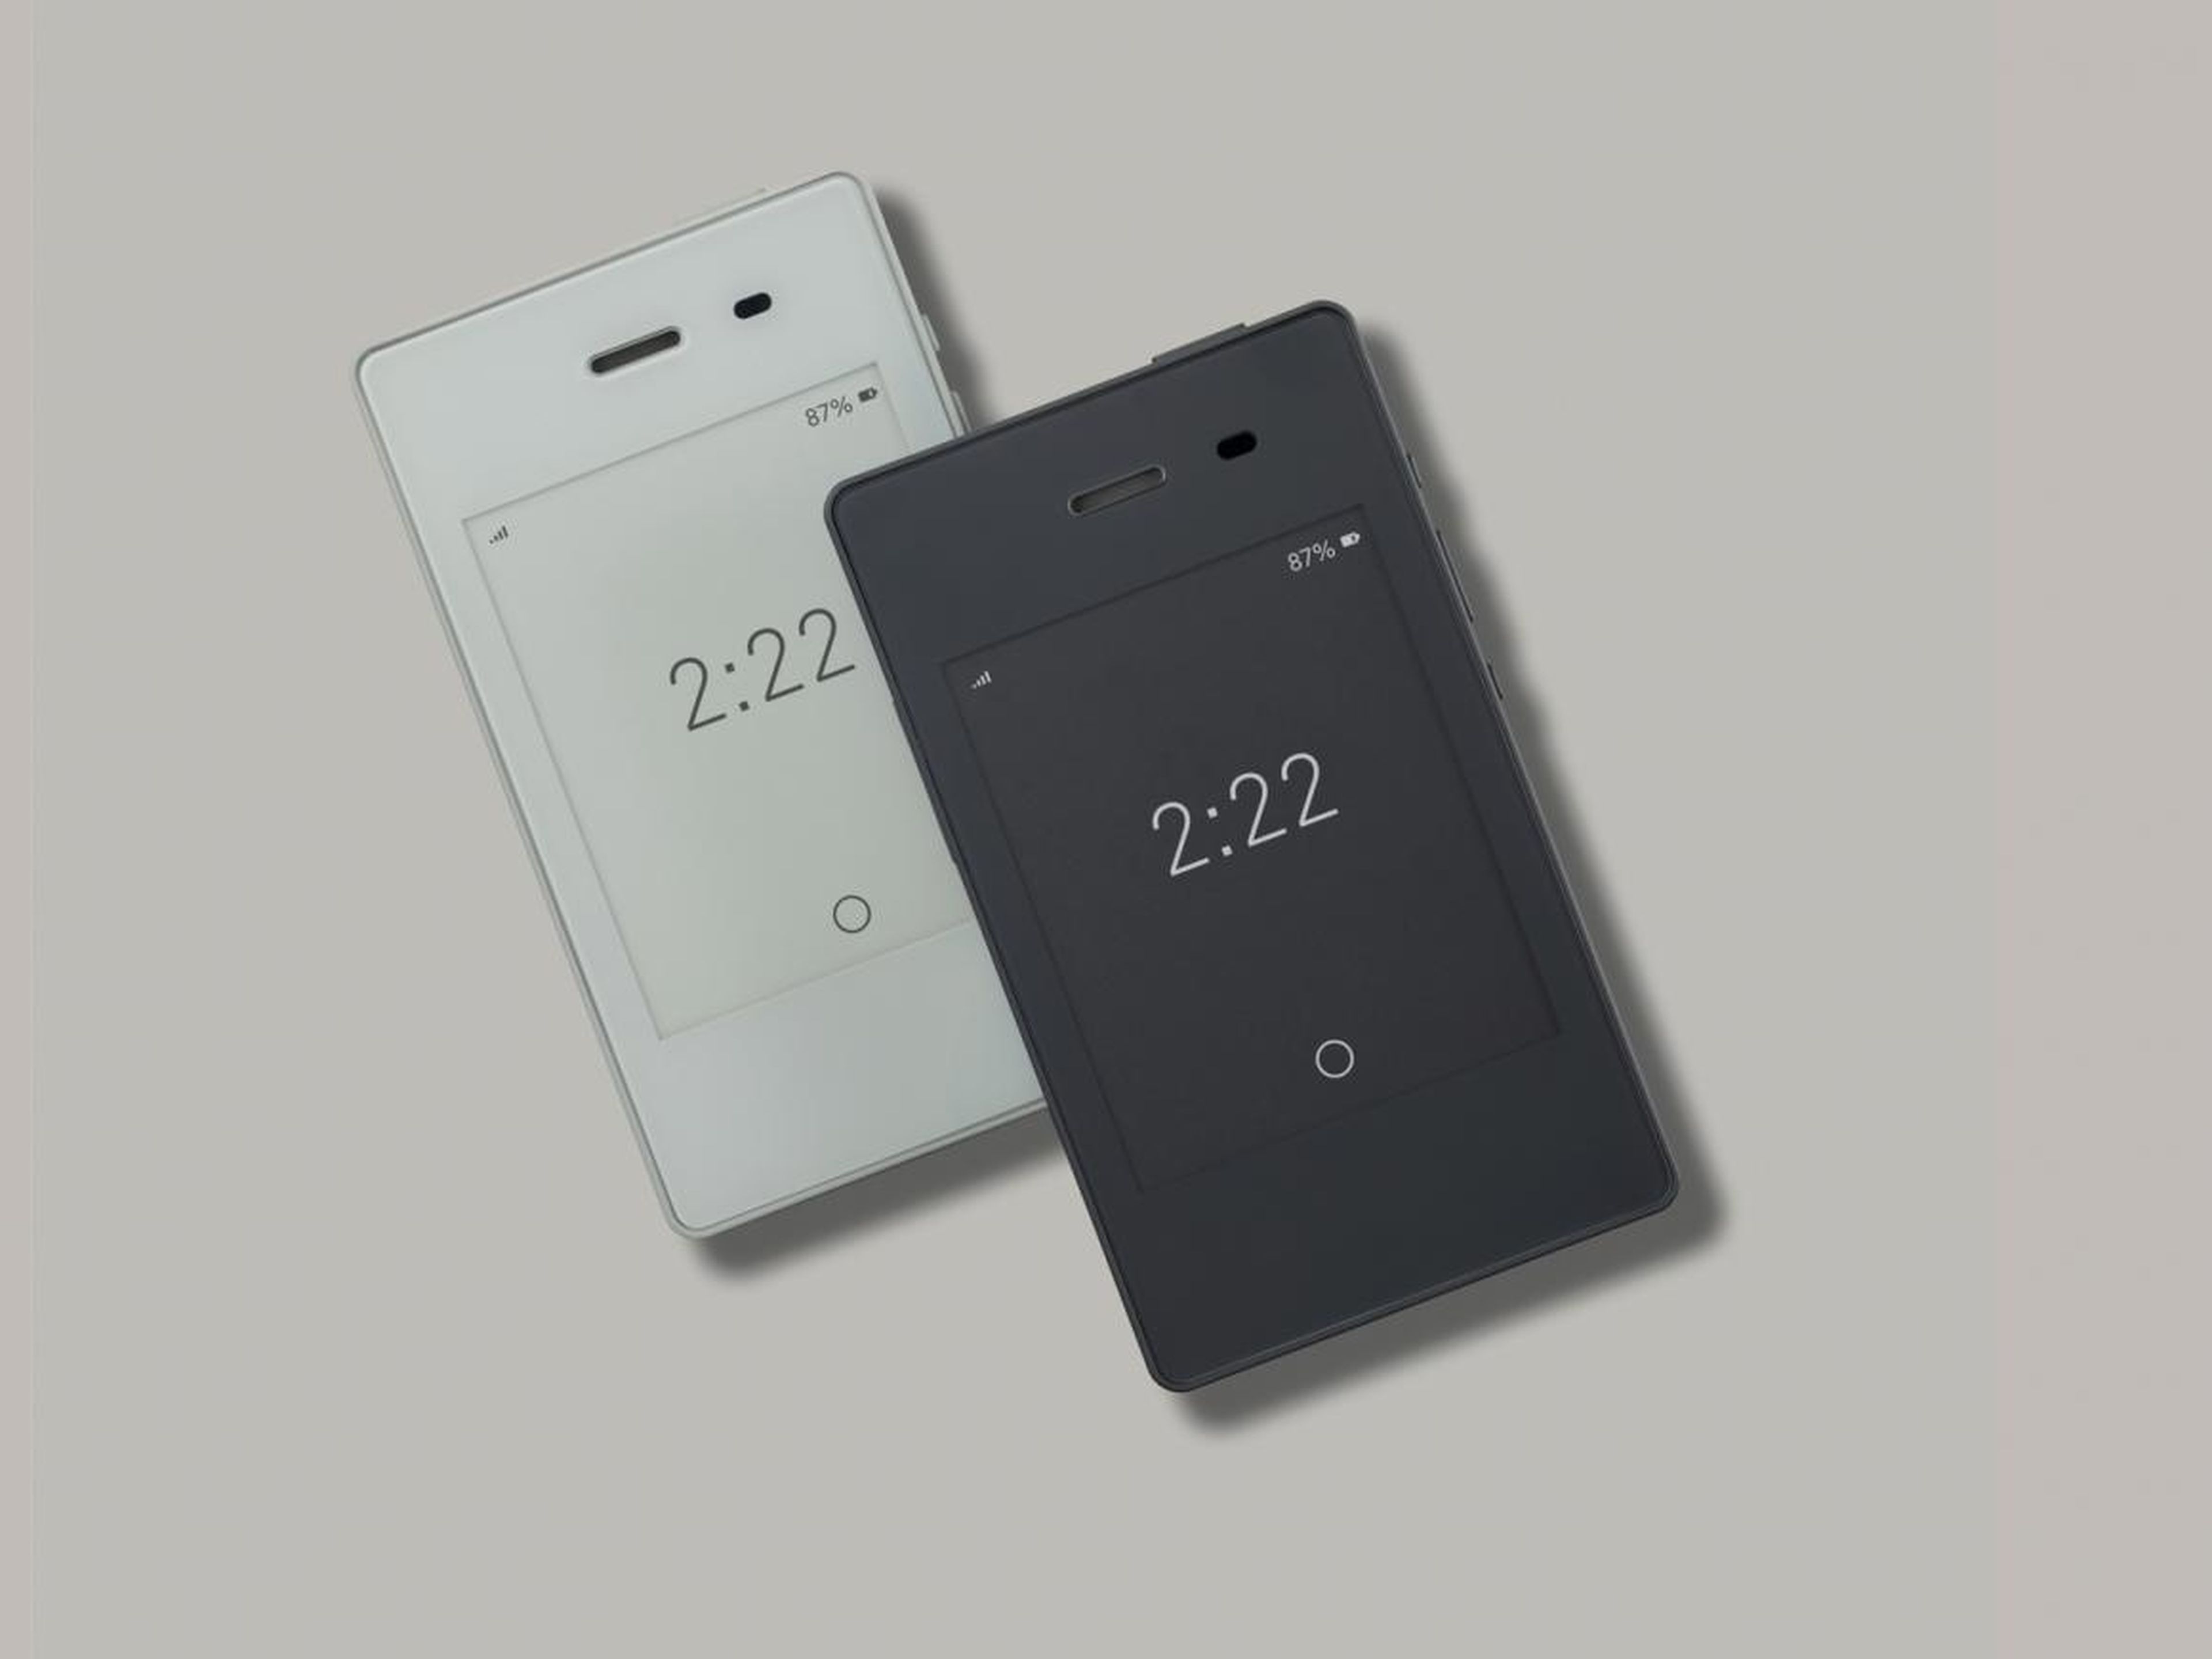 The Light Phone 2 comes in two colors, which Tang said were based on the lightest and darkest colors of e-ink.